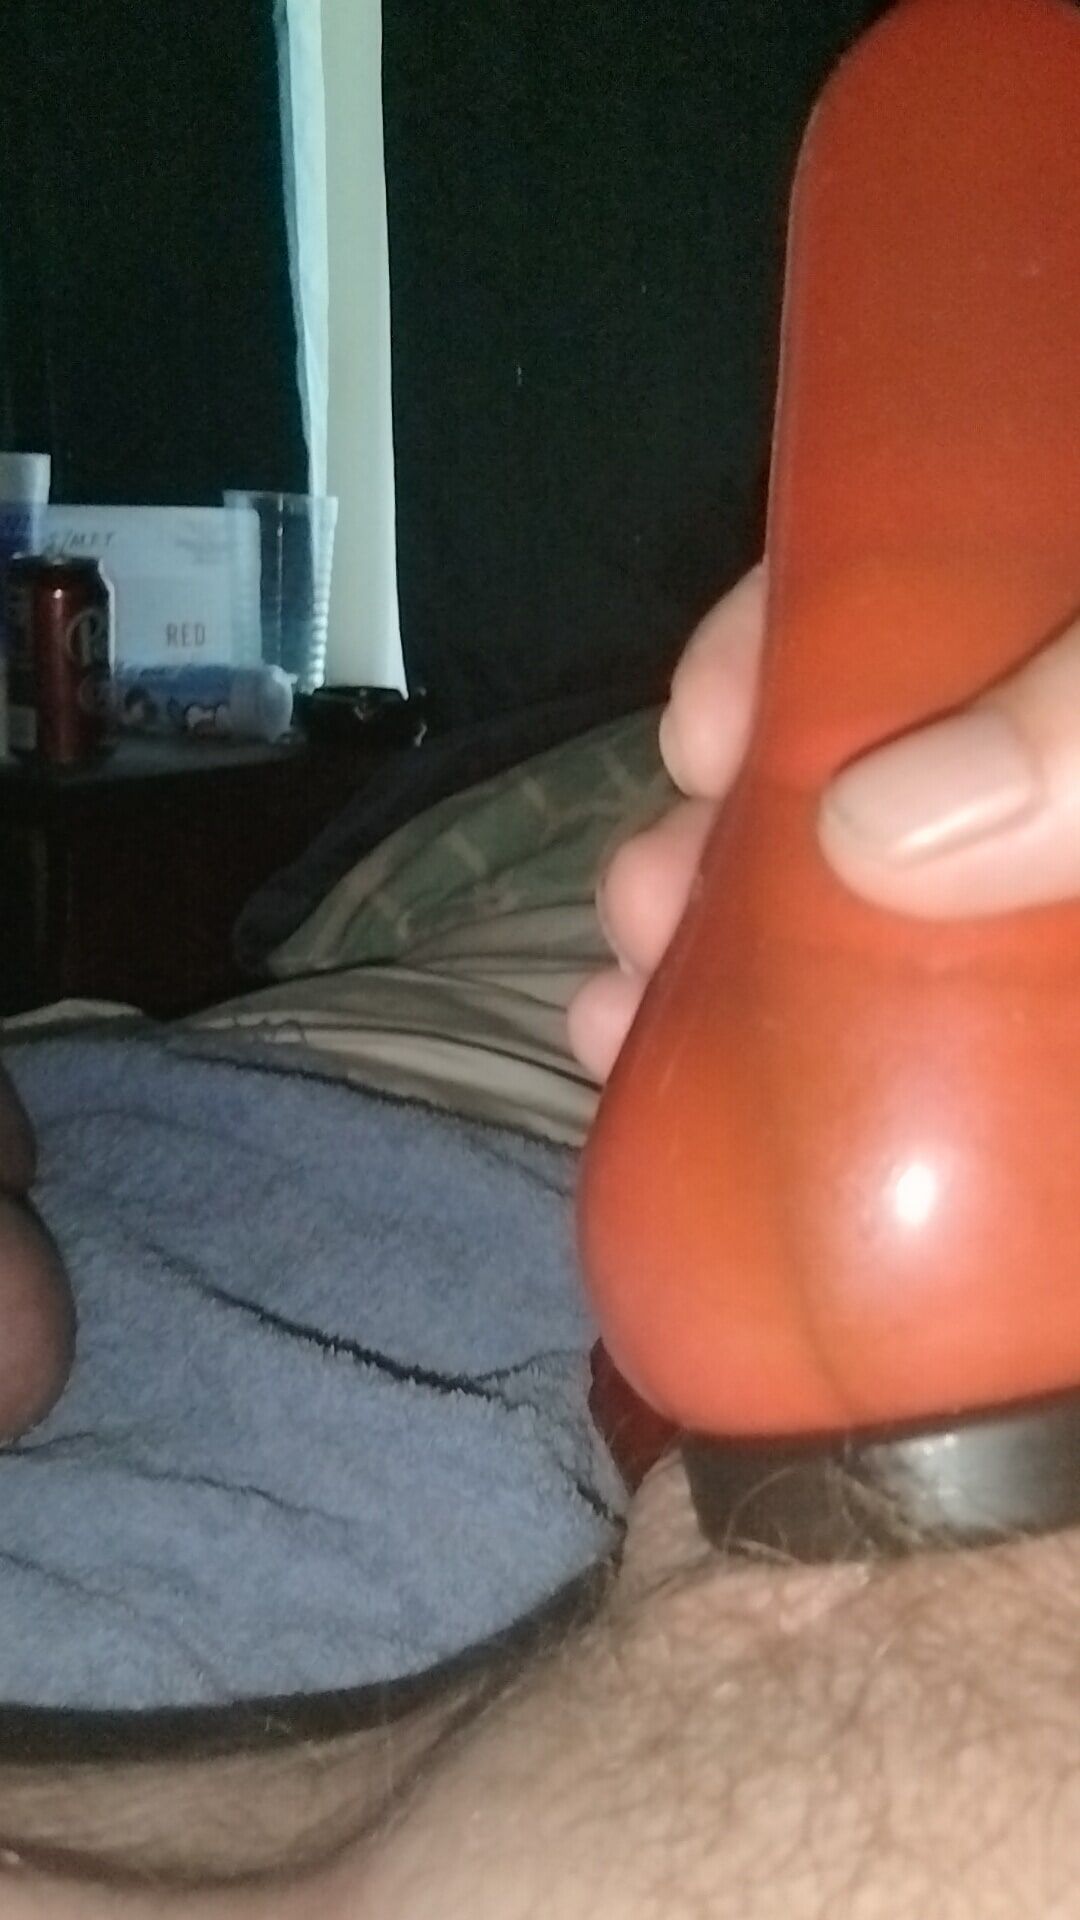 Just some random pics of my cock and my asshole 